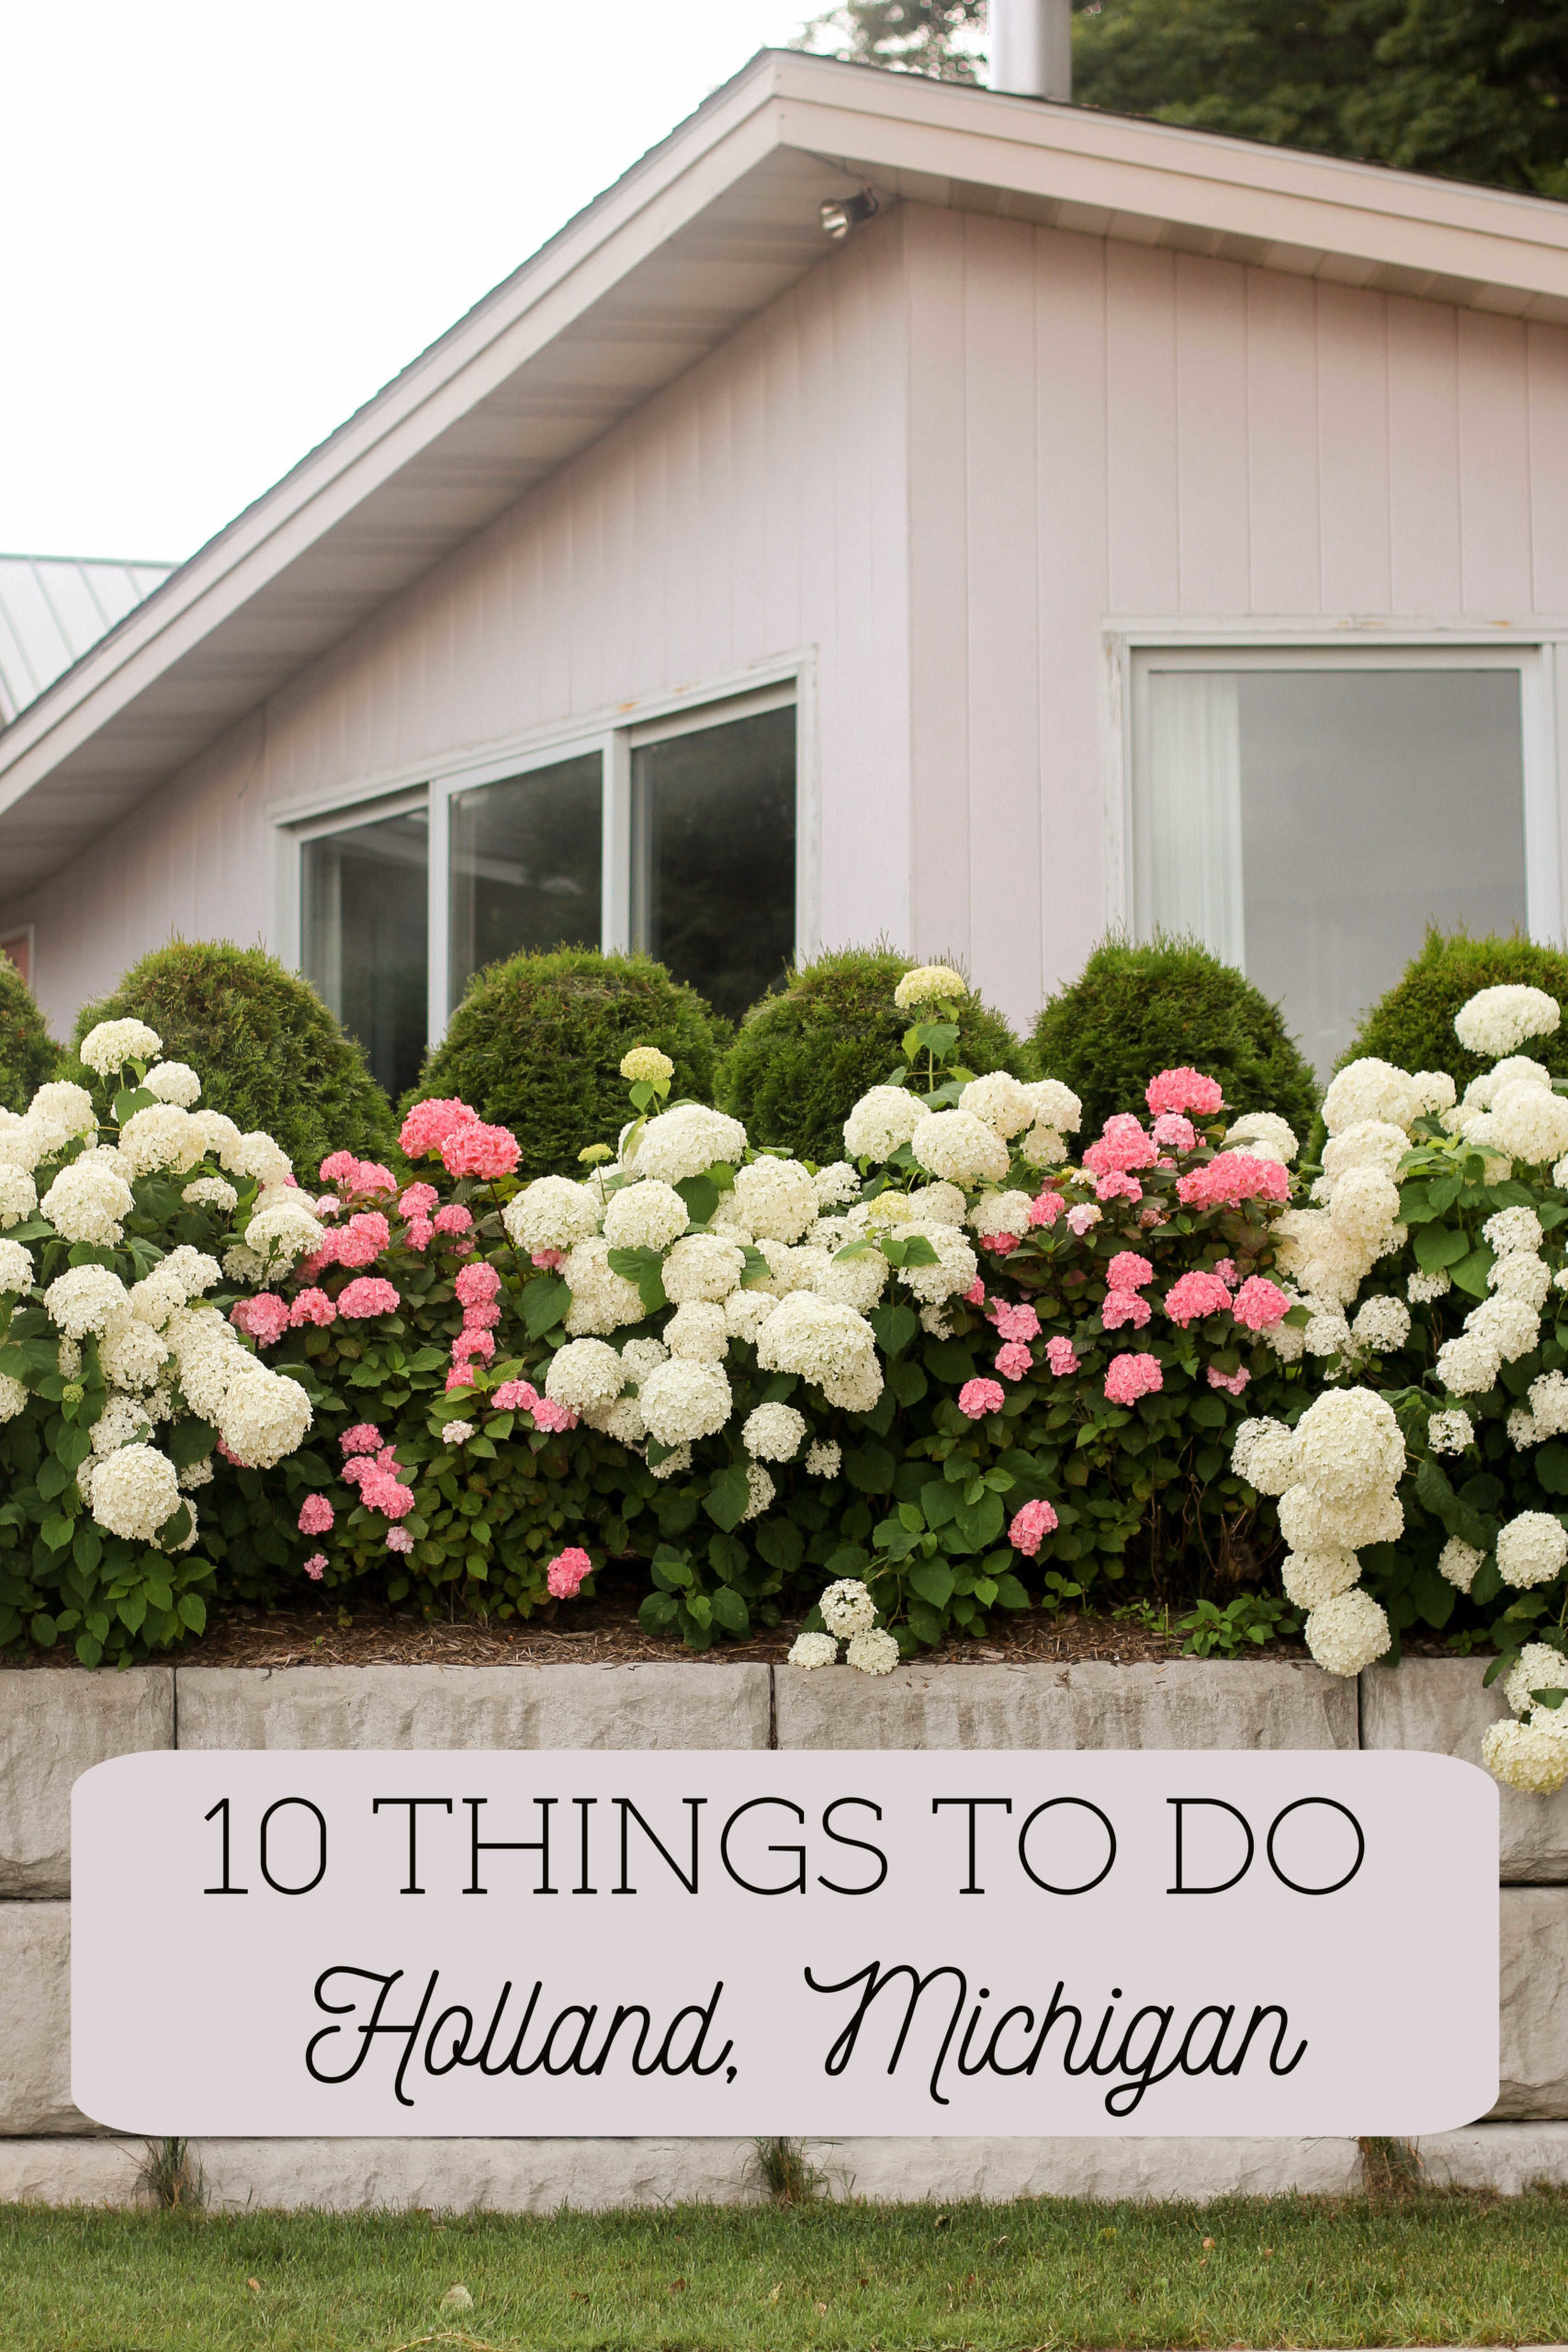 10 Things to Do in Holland, Michigan